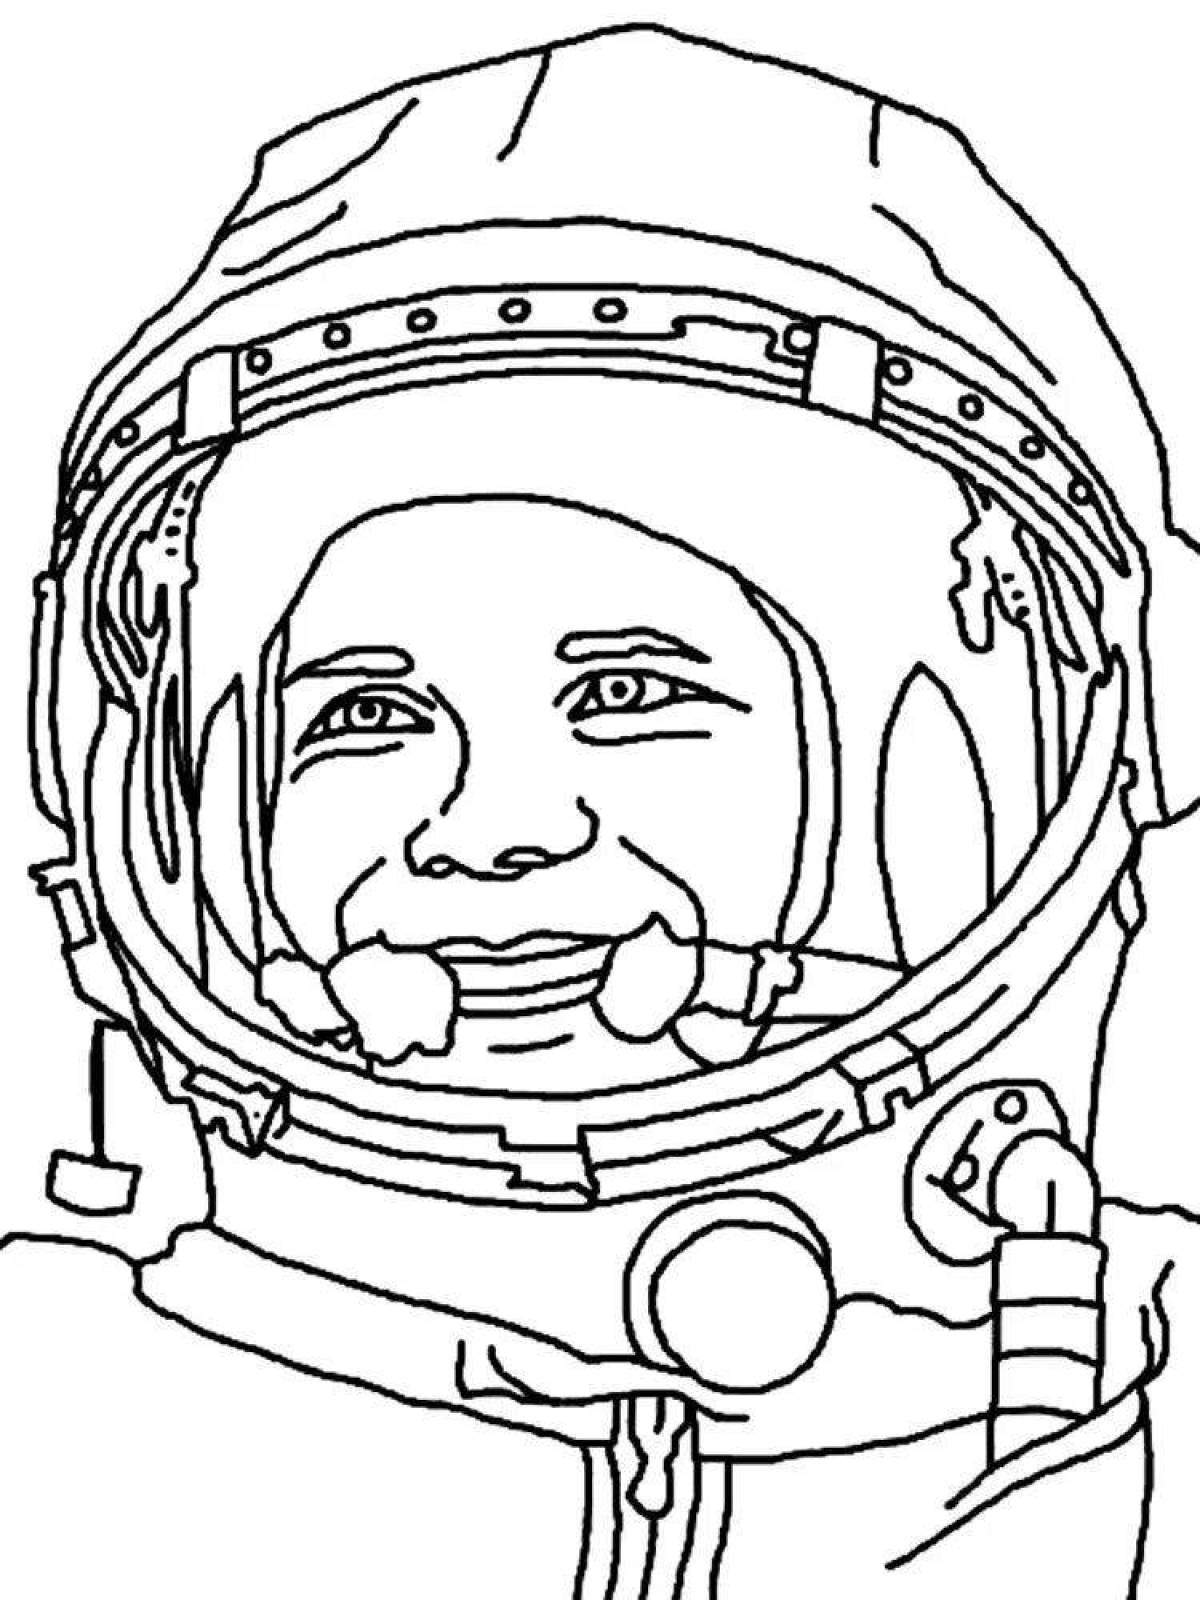 Gagarin's amazing coloring book